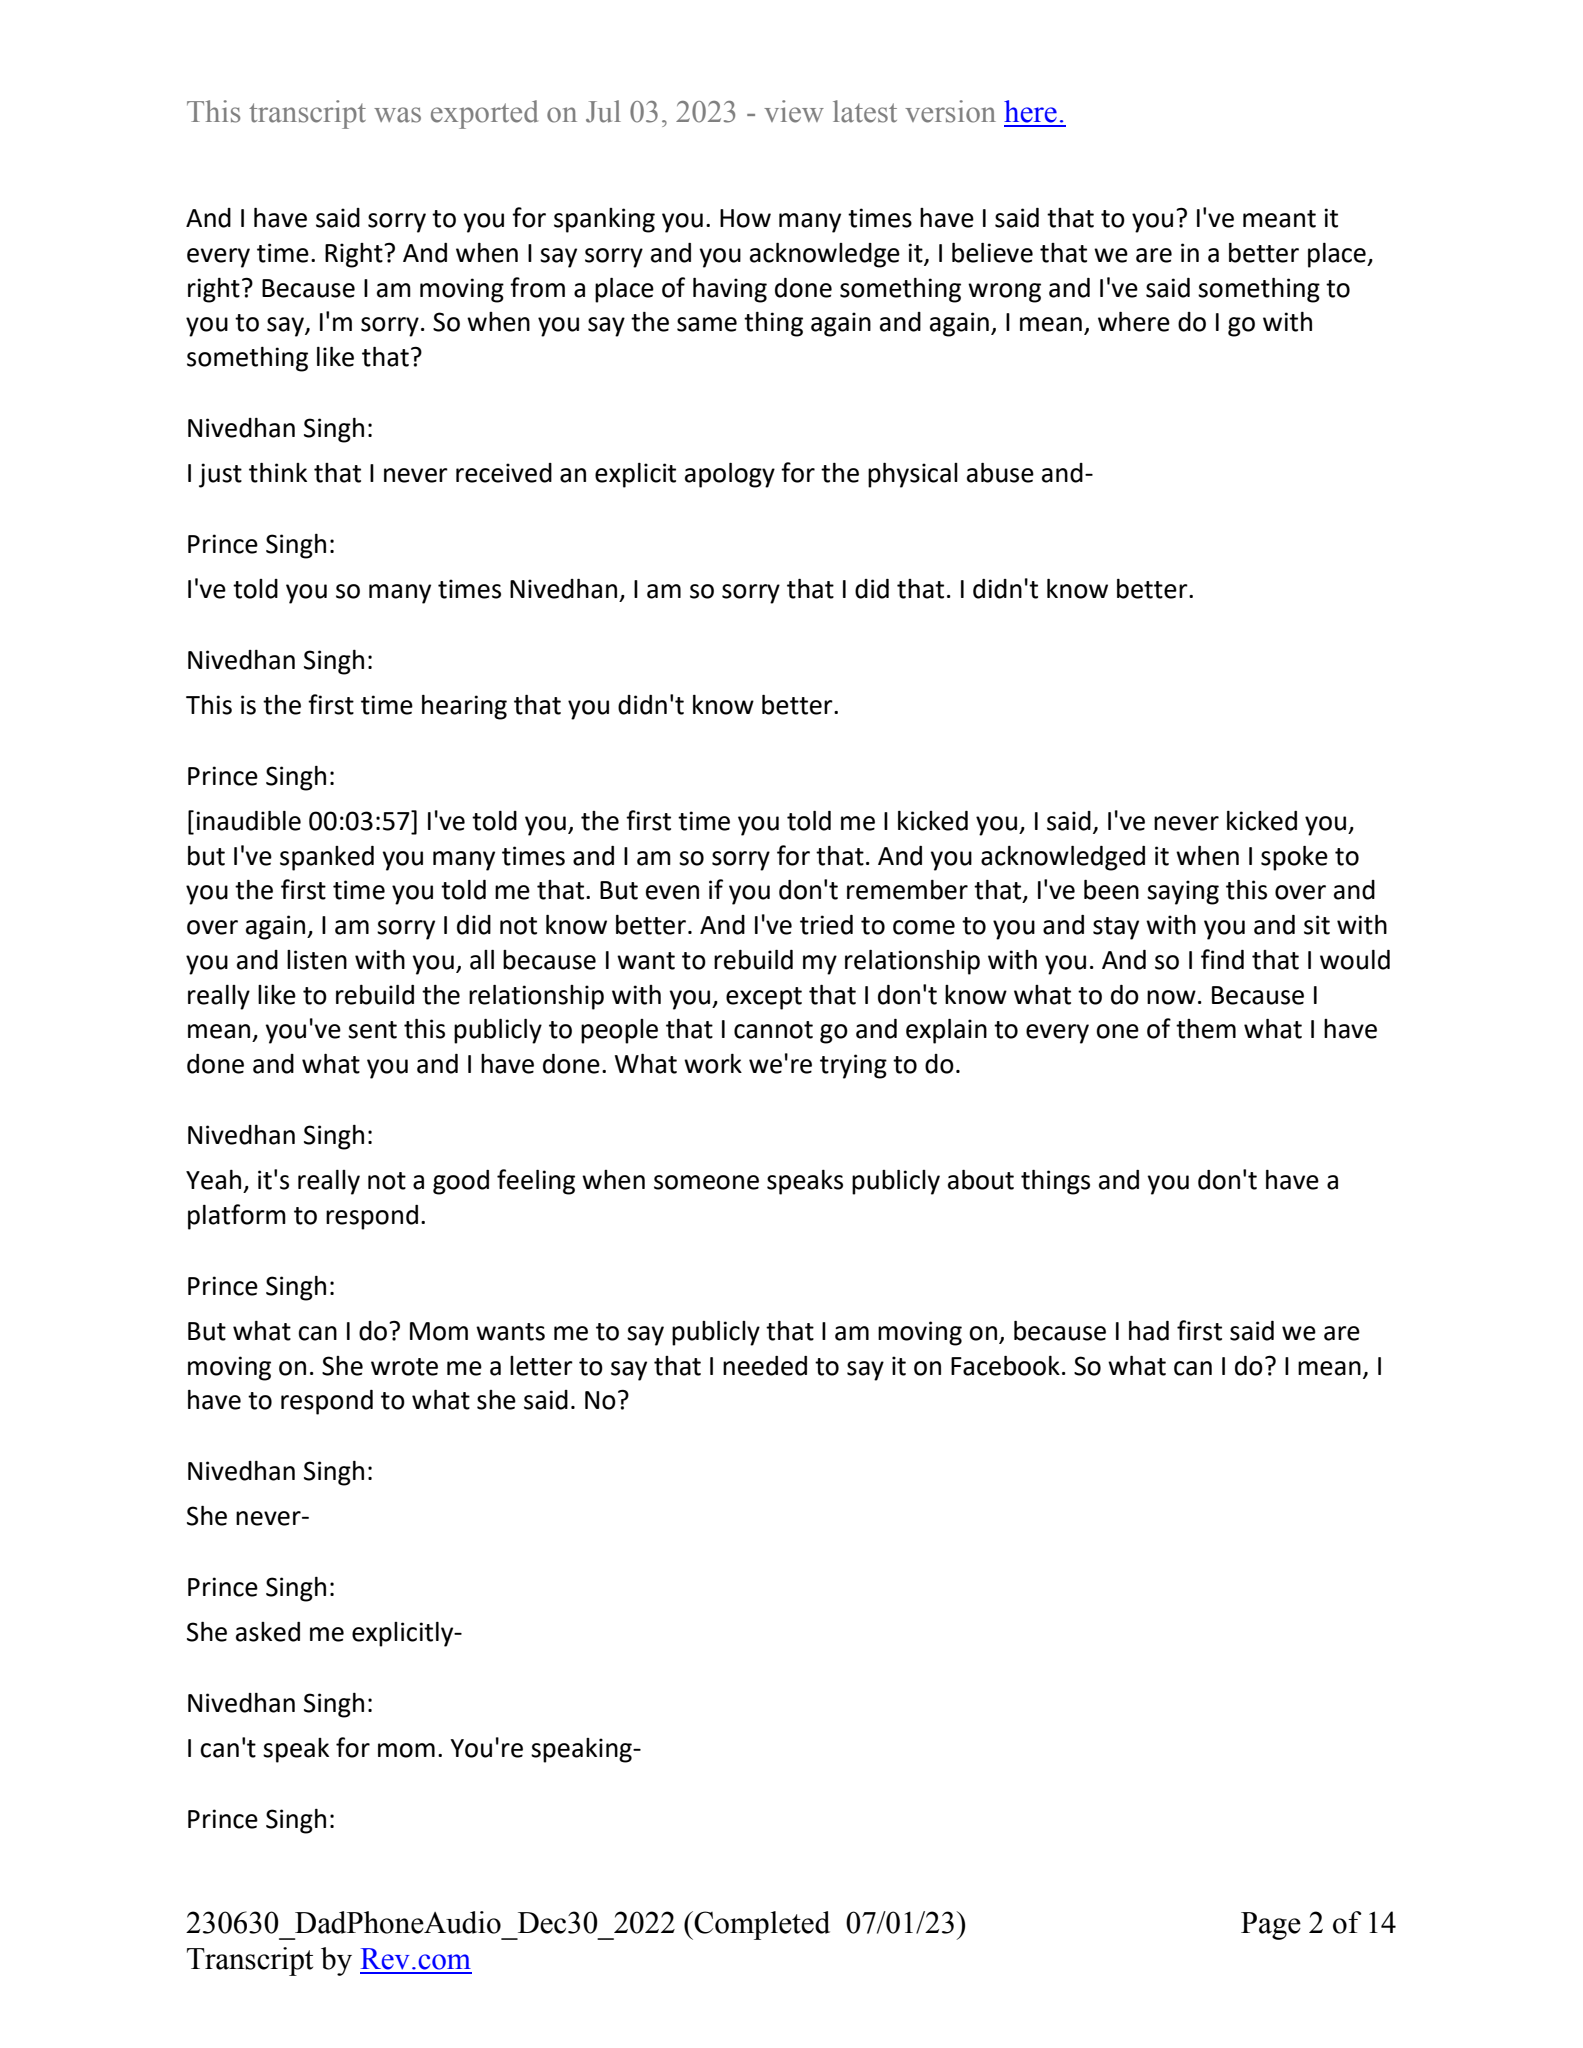 December 30th, 2022 phone call transcript - Page 2